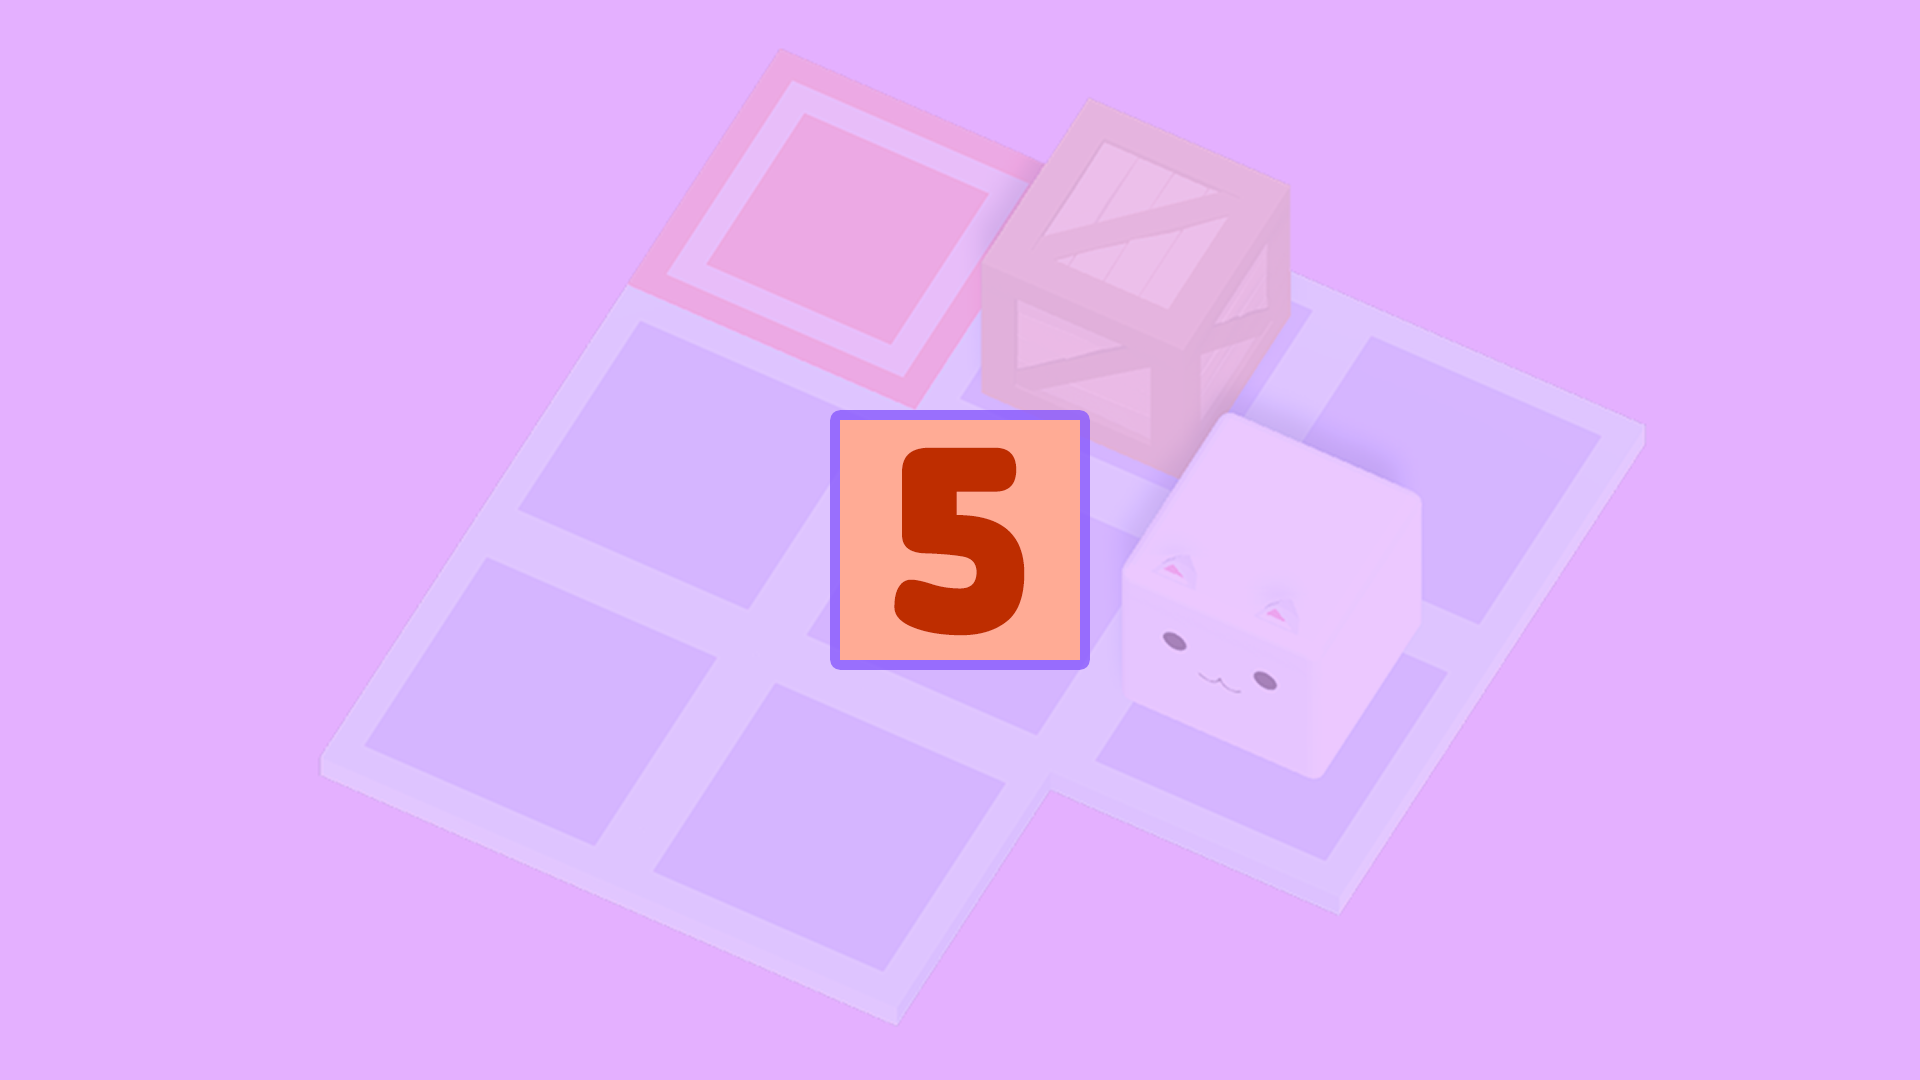 Icon for Level 5